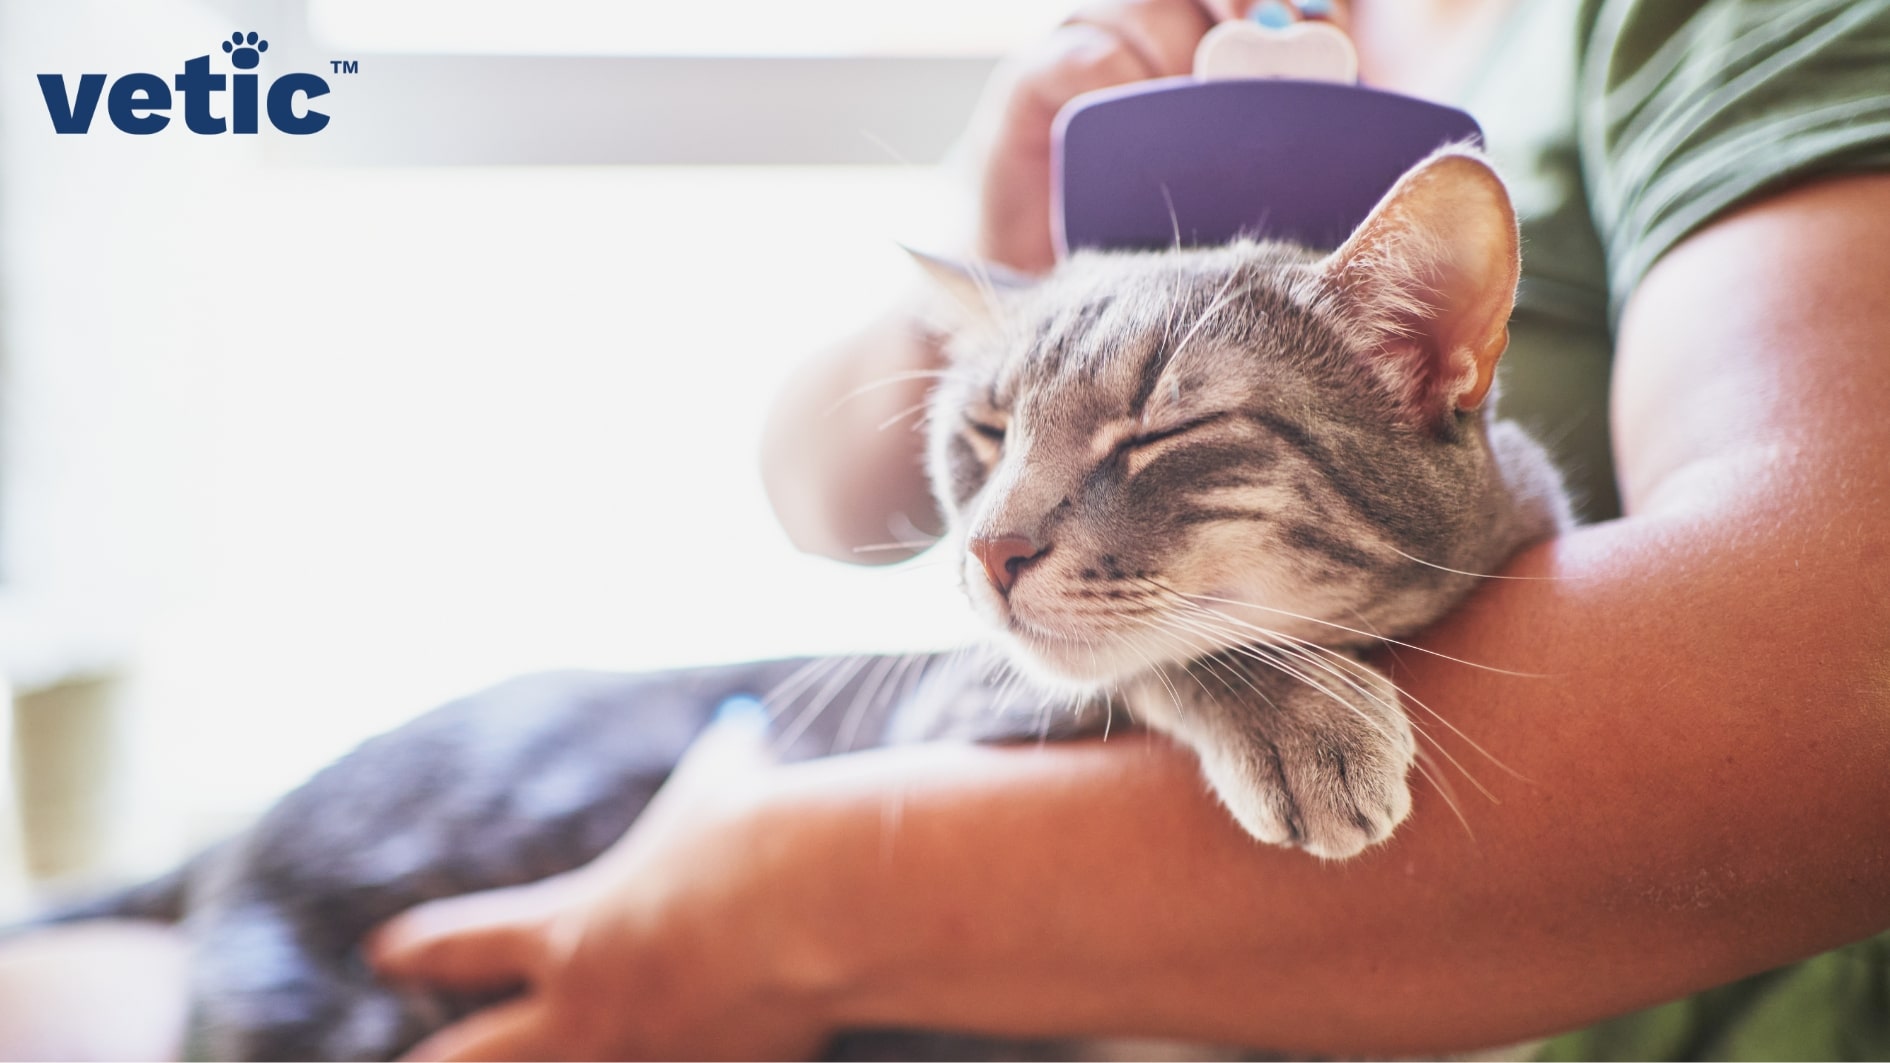 A woman holding a cat on her lap. the cat is resting his head and right paw on the woman's hand as she brushes the cat with another hand with a deShedder. DeShedding can help reduce shedding in cats.